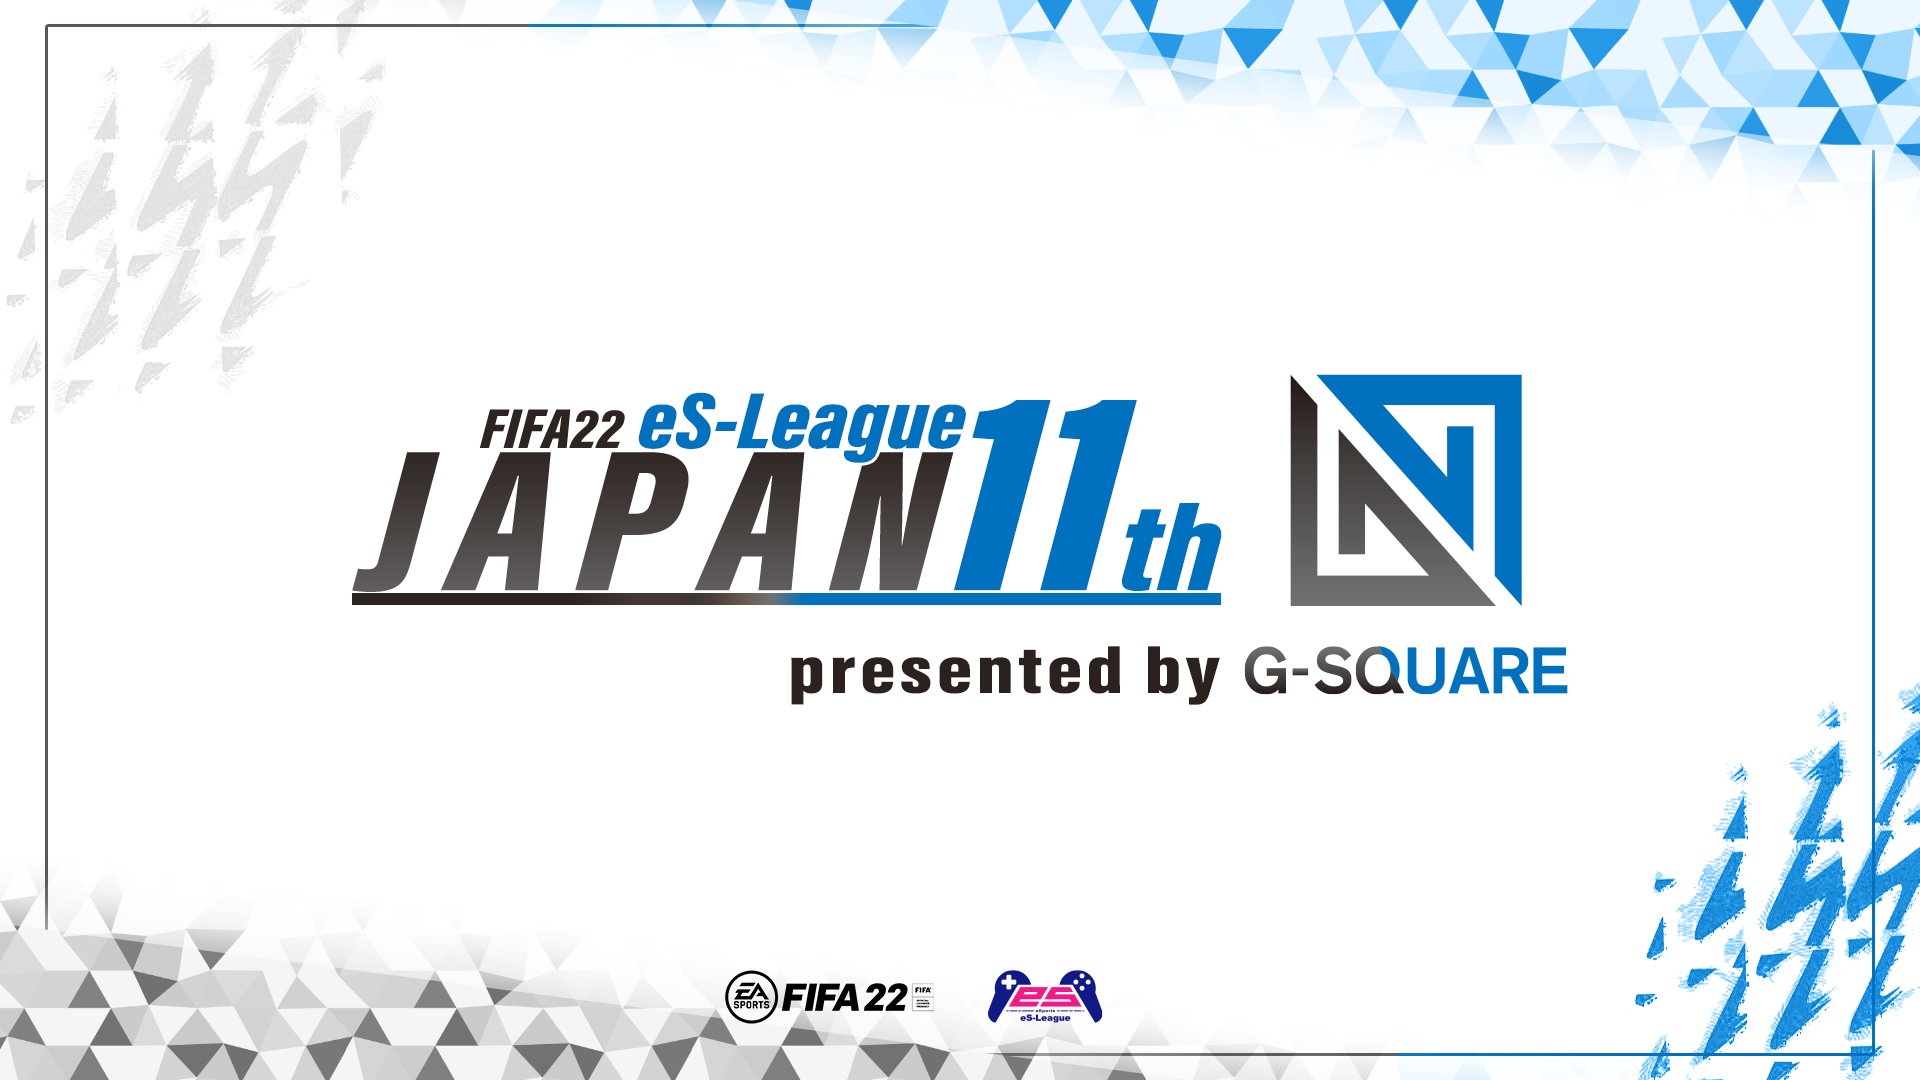 FIFA22 eS-League JAPAN 11th presented by G-SQUARE開幕迫る！